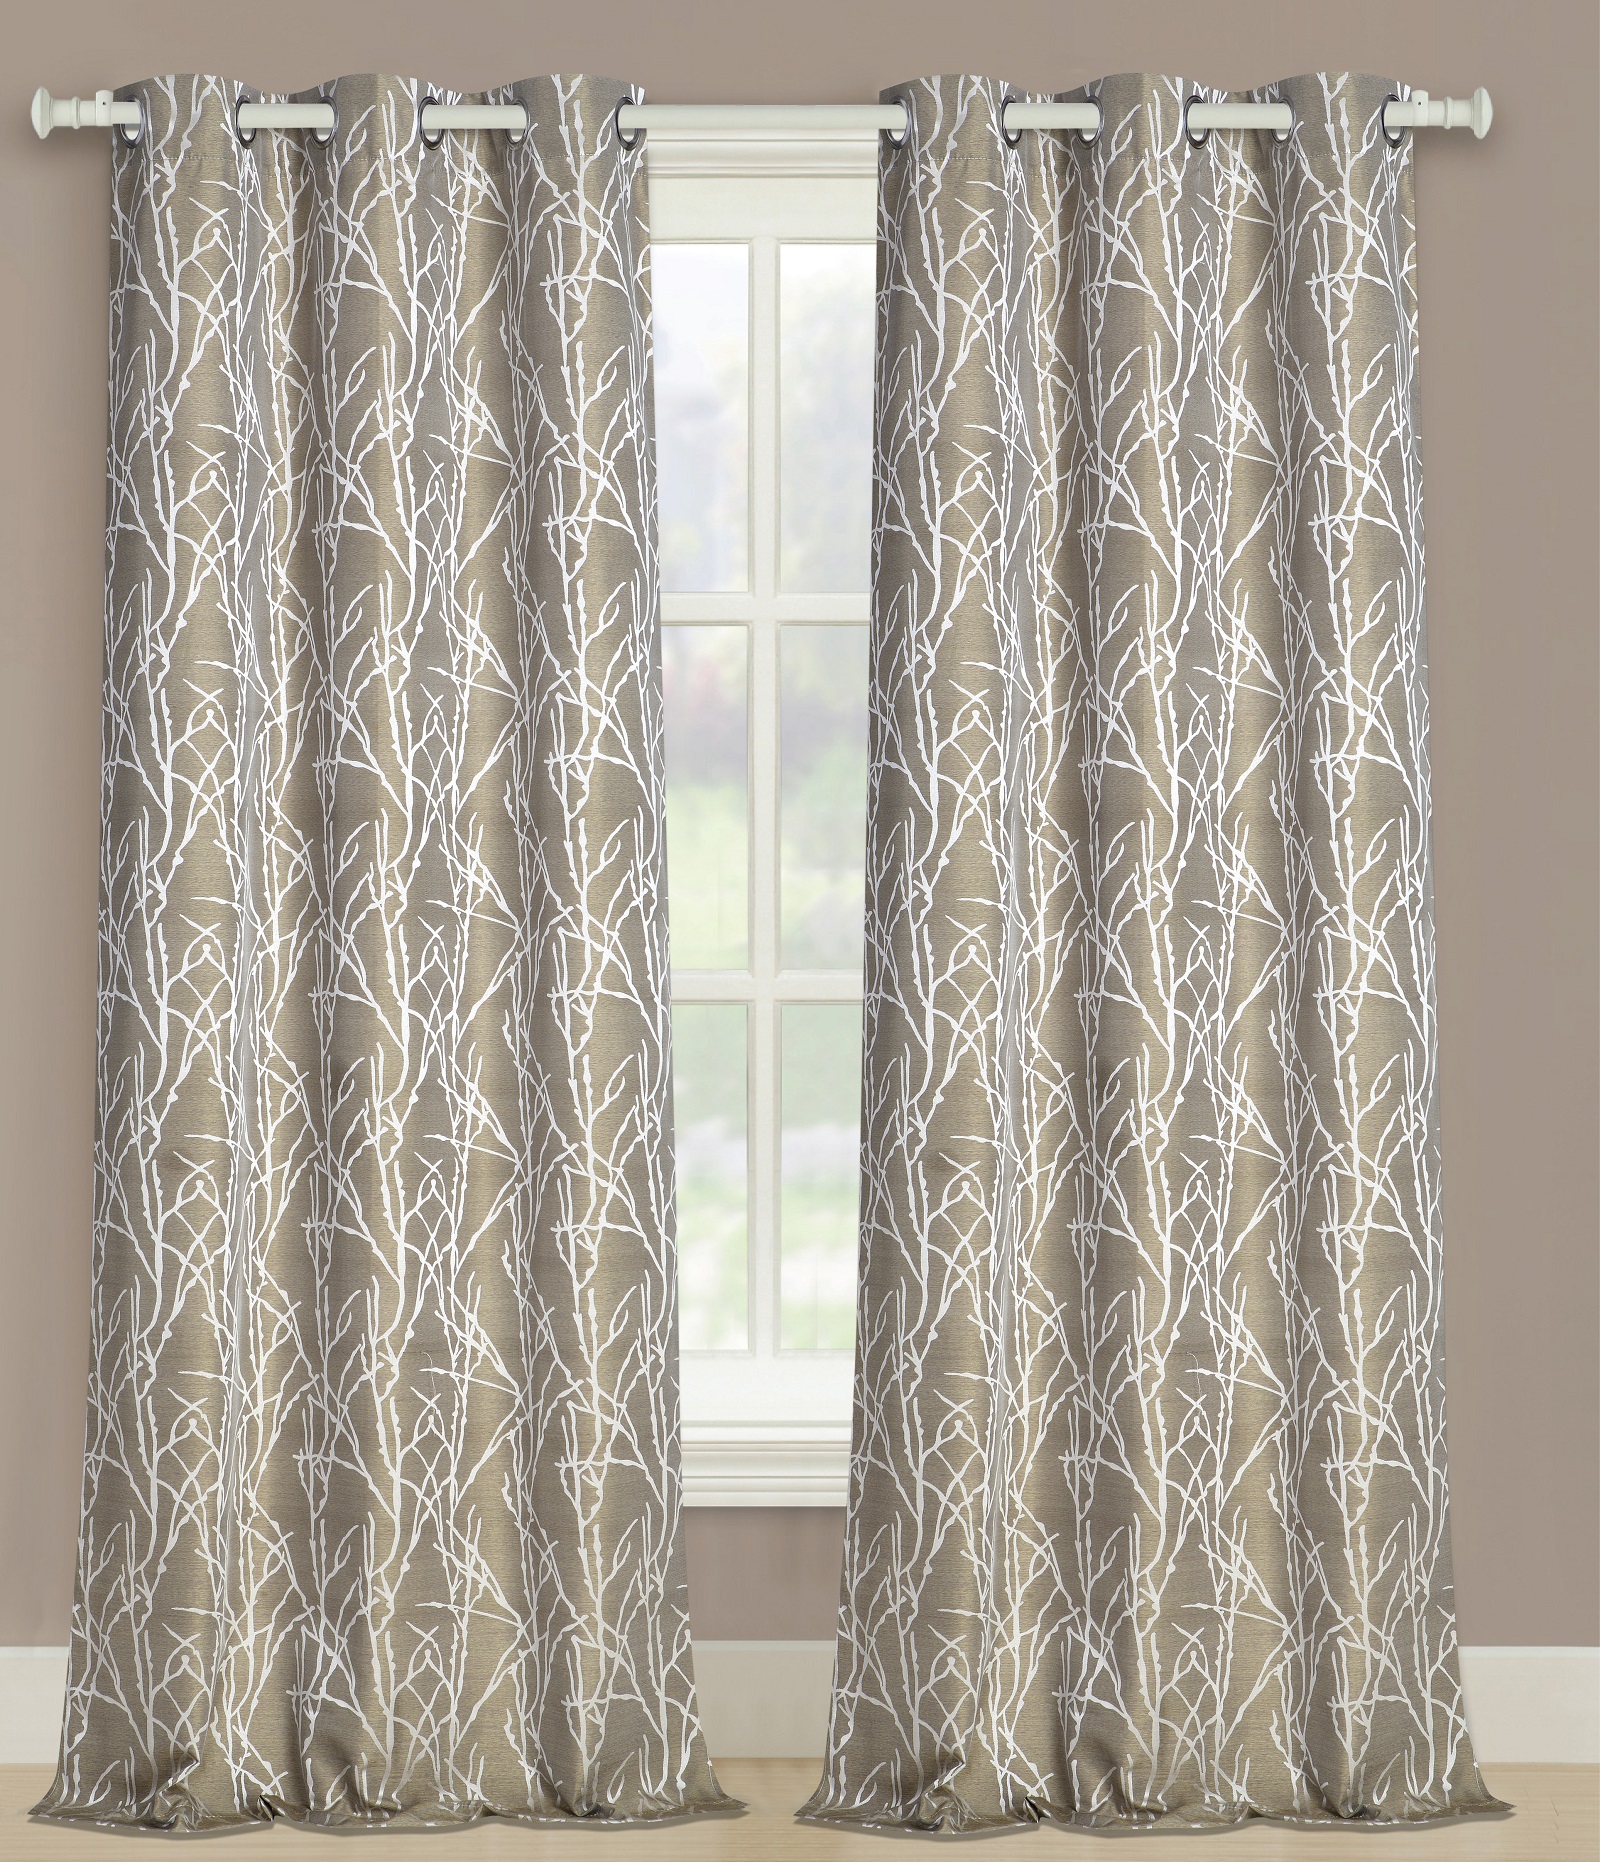 United Curtain Company Taylor 76" wide x 63" long grommet top jacquard twig design. Available in: Gold, Natural and Plum